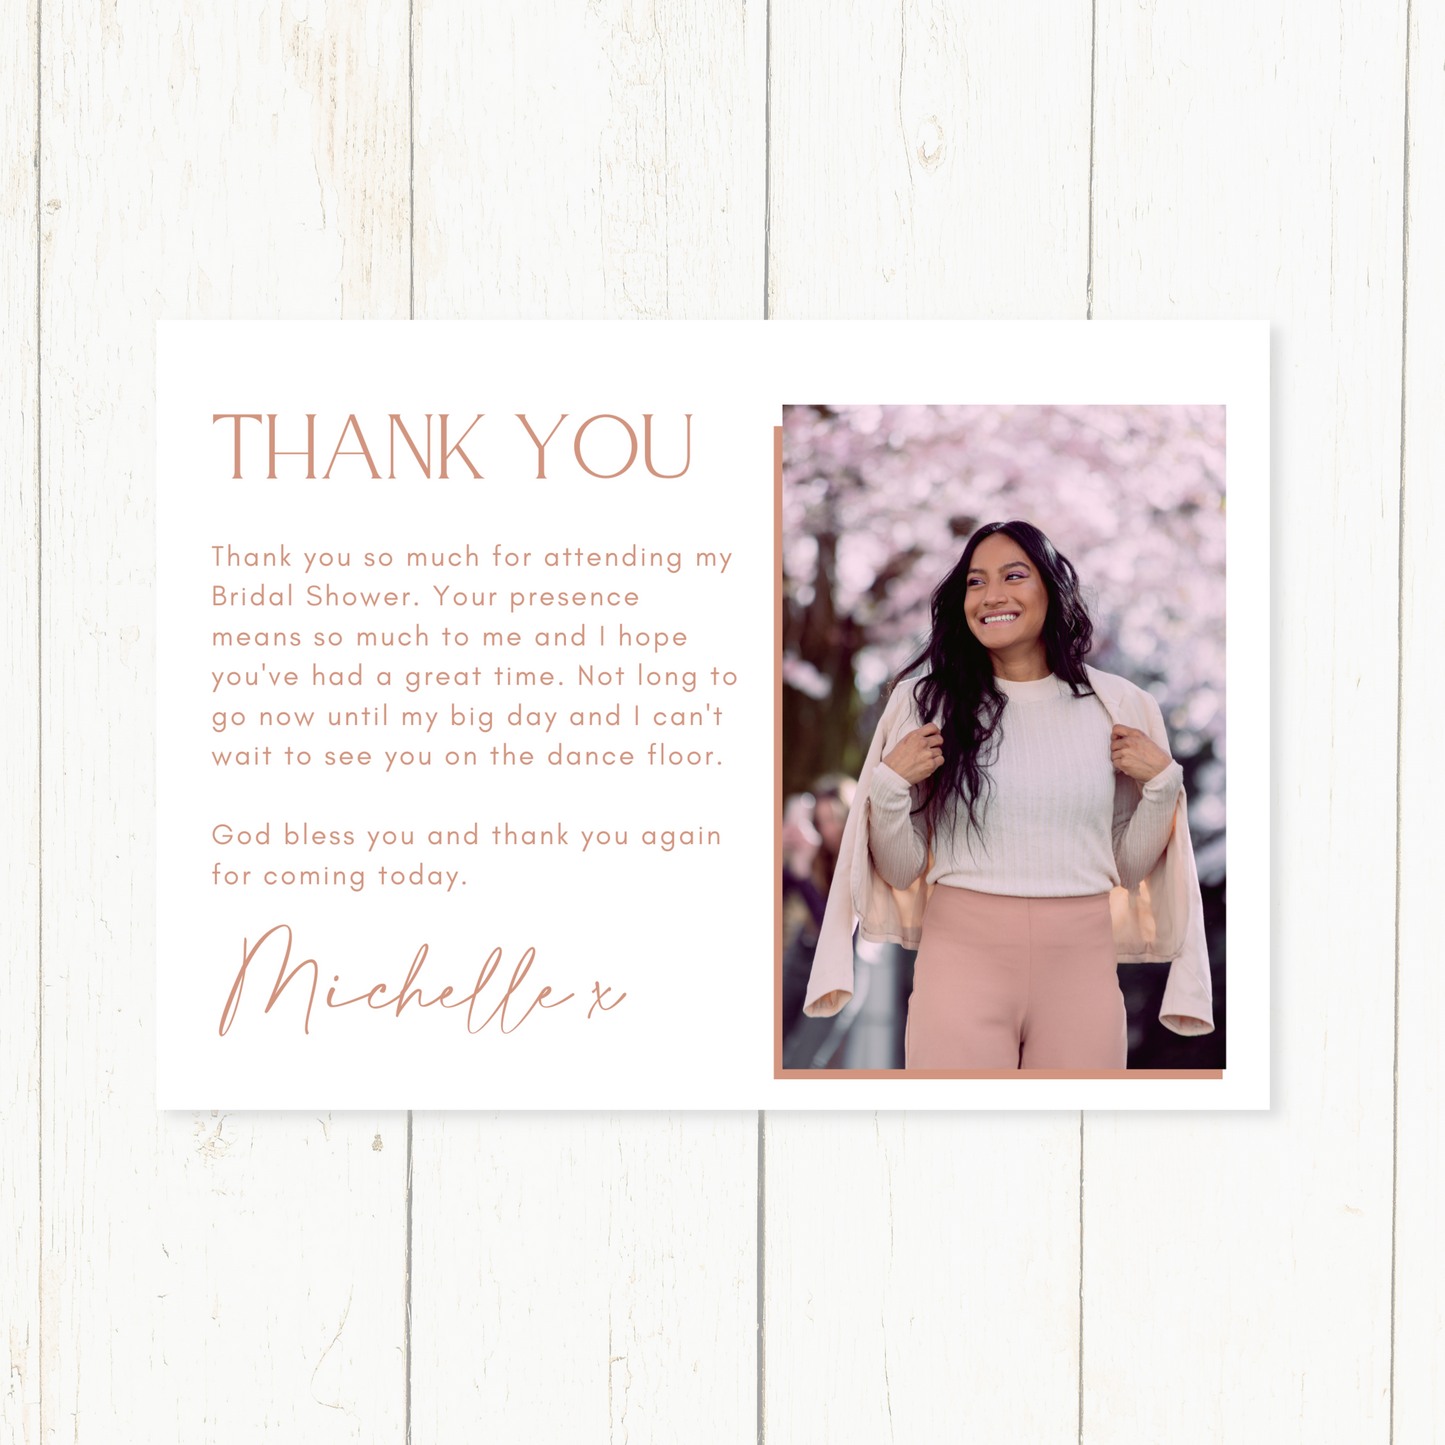 Bridal Shower Thank You Cards | Pretty'n'Pink